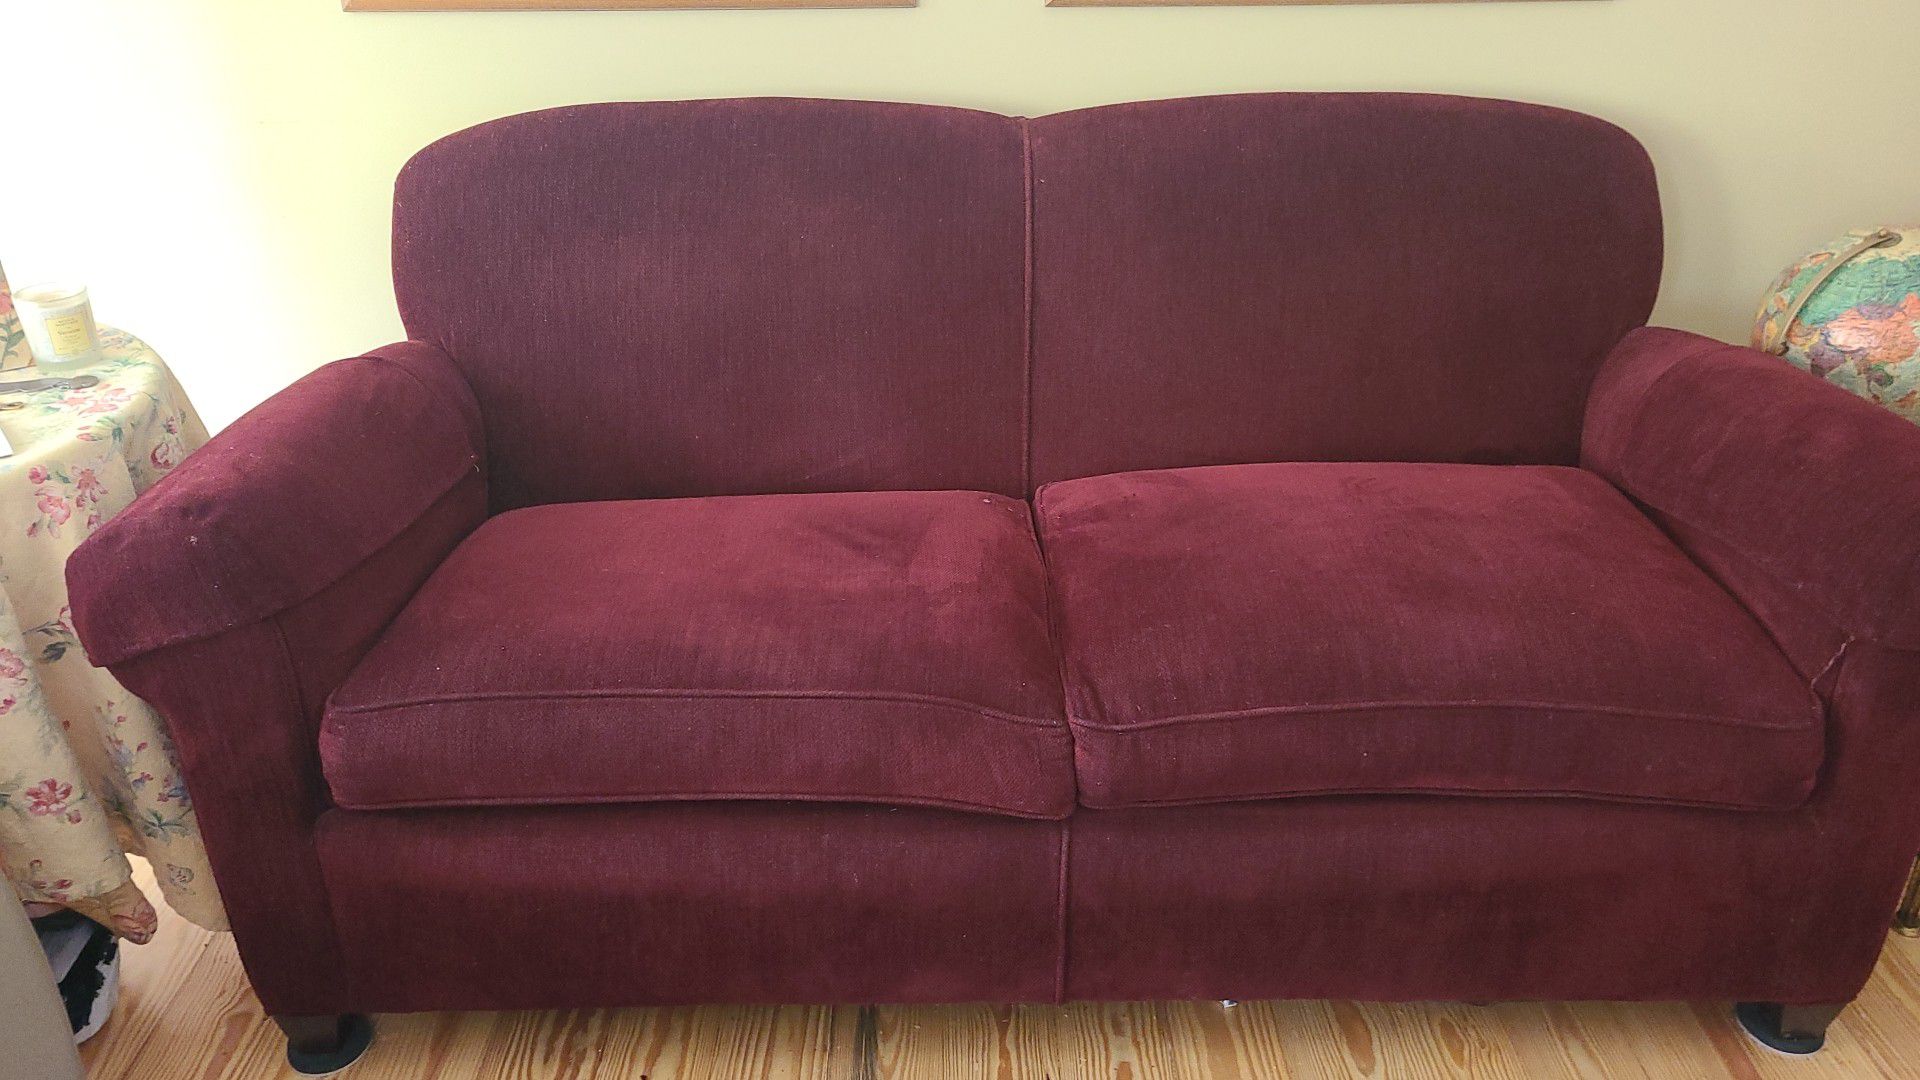 Crate & Barrel Couch 72in. Excellent quality & condition pd 6,000.00. Downsizing to smaller home.. Must Go Today.